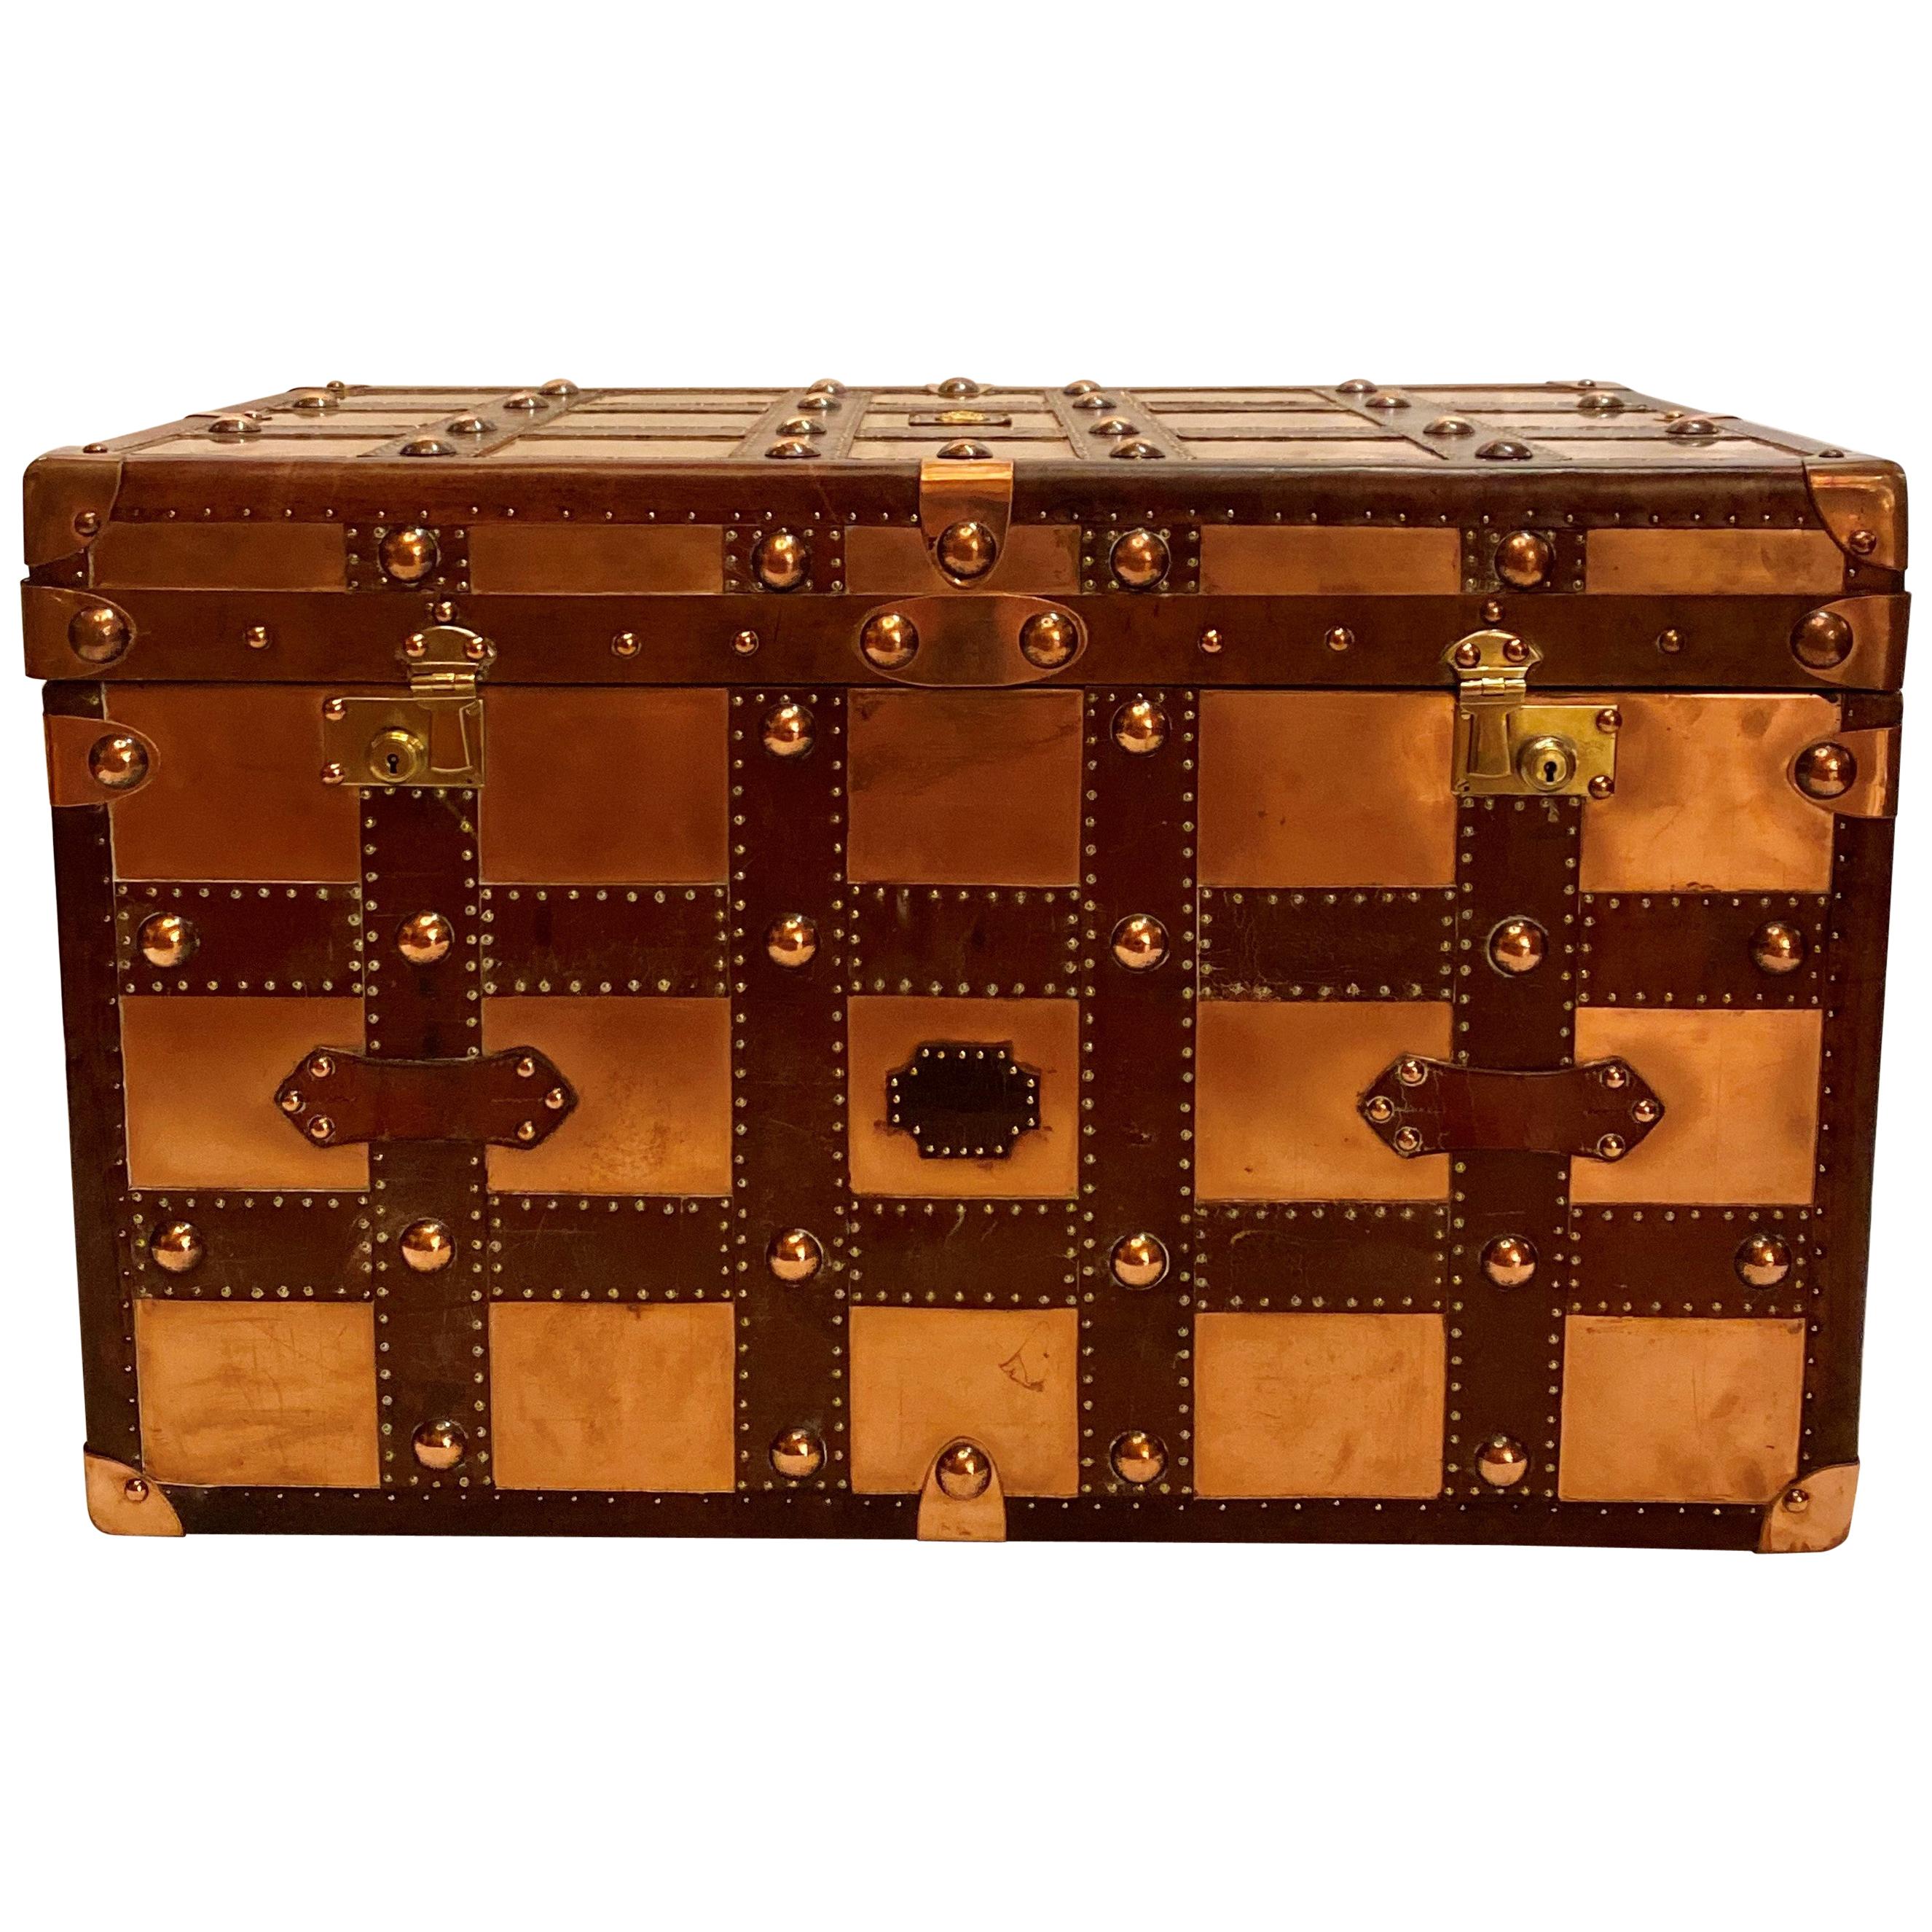 Antique British Military Officer's Trunk, Copper and Leather, circa 1890